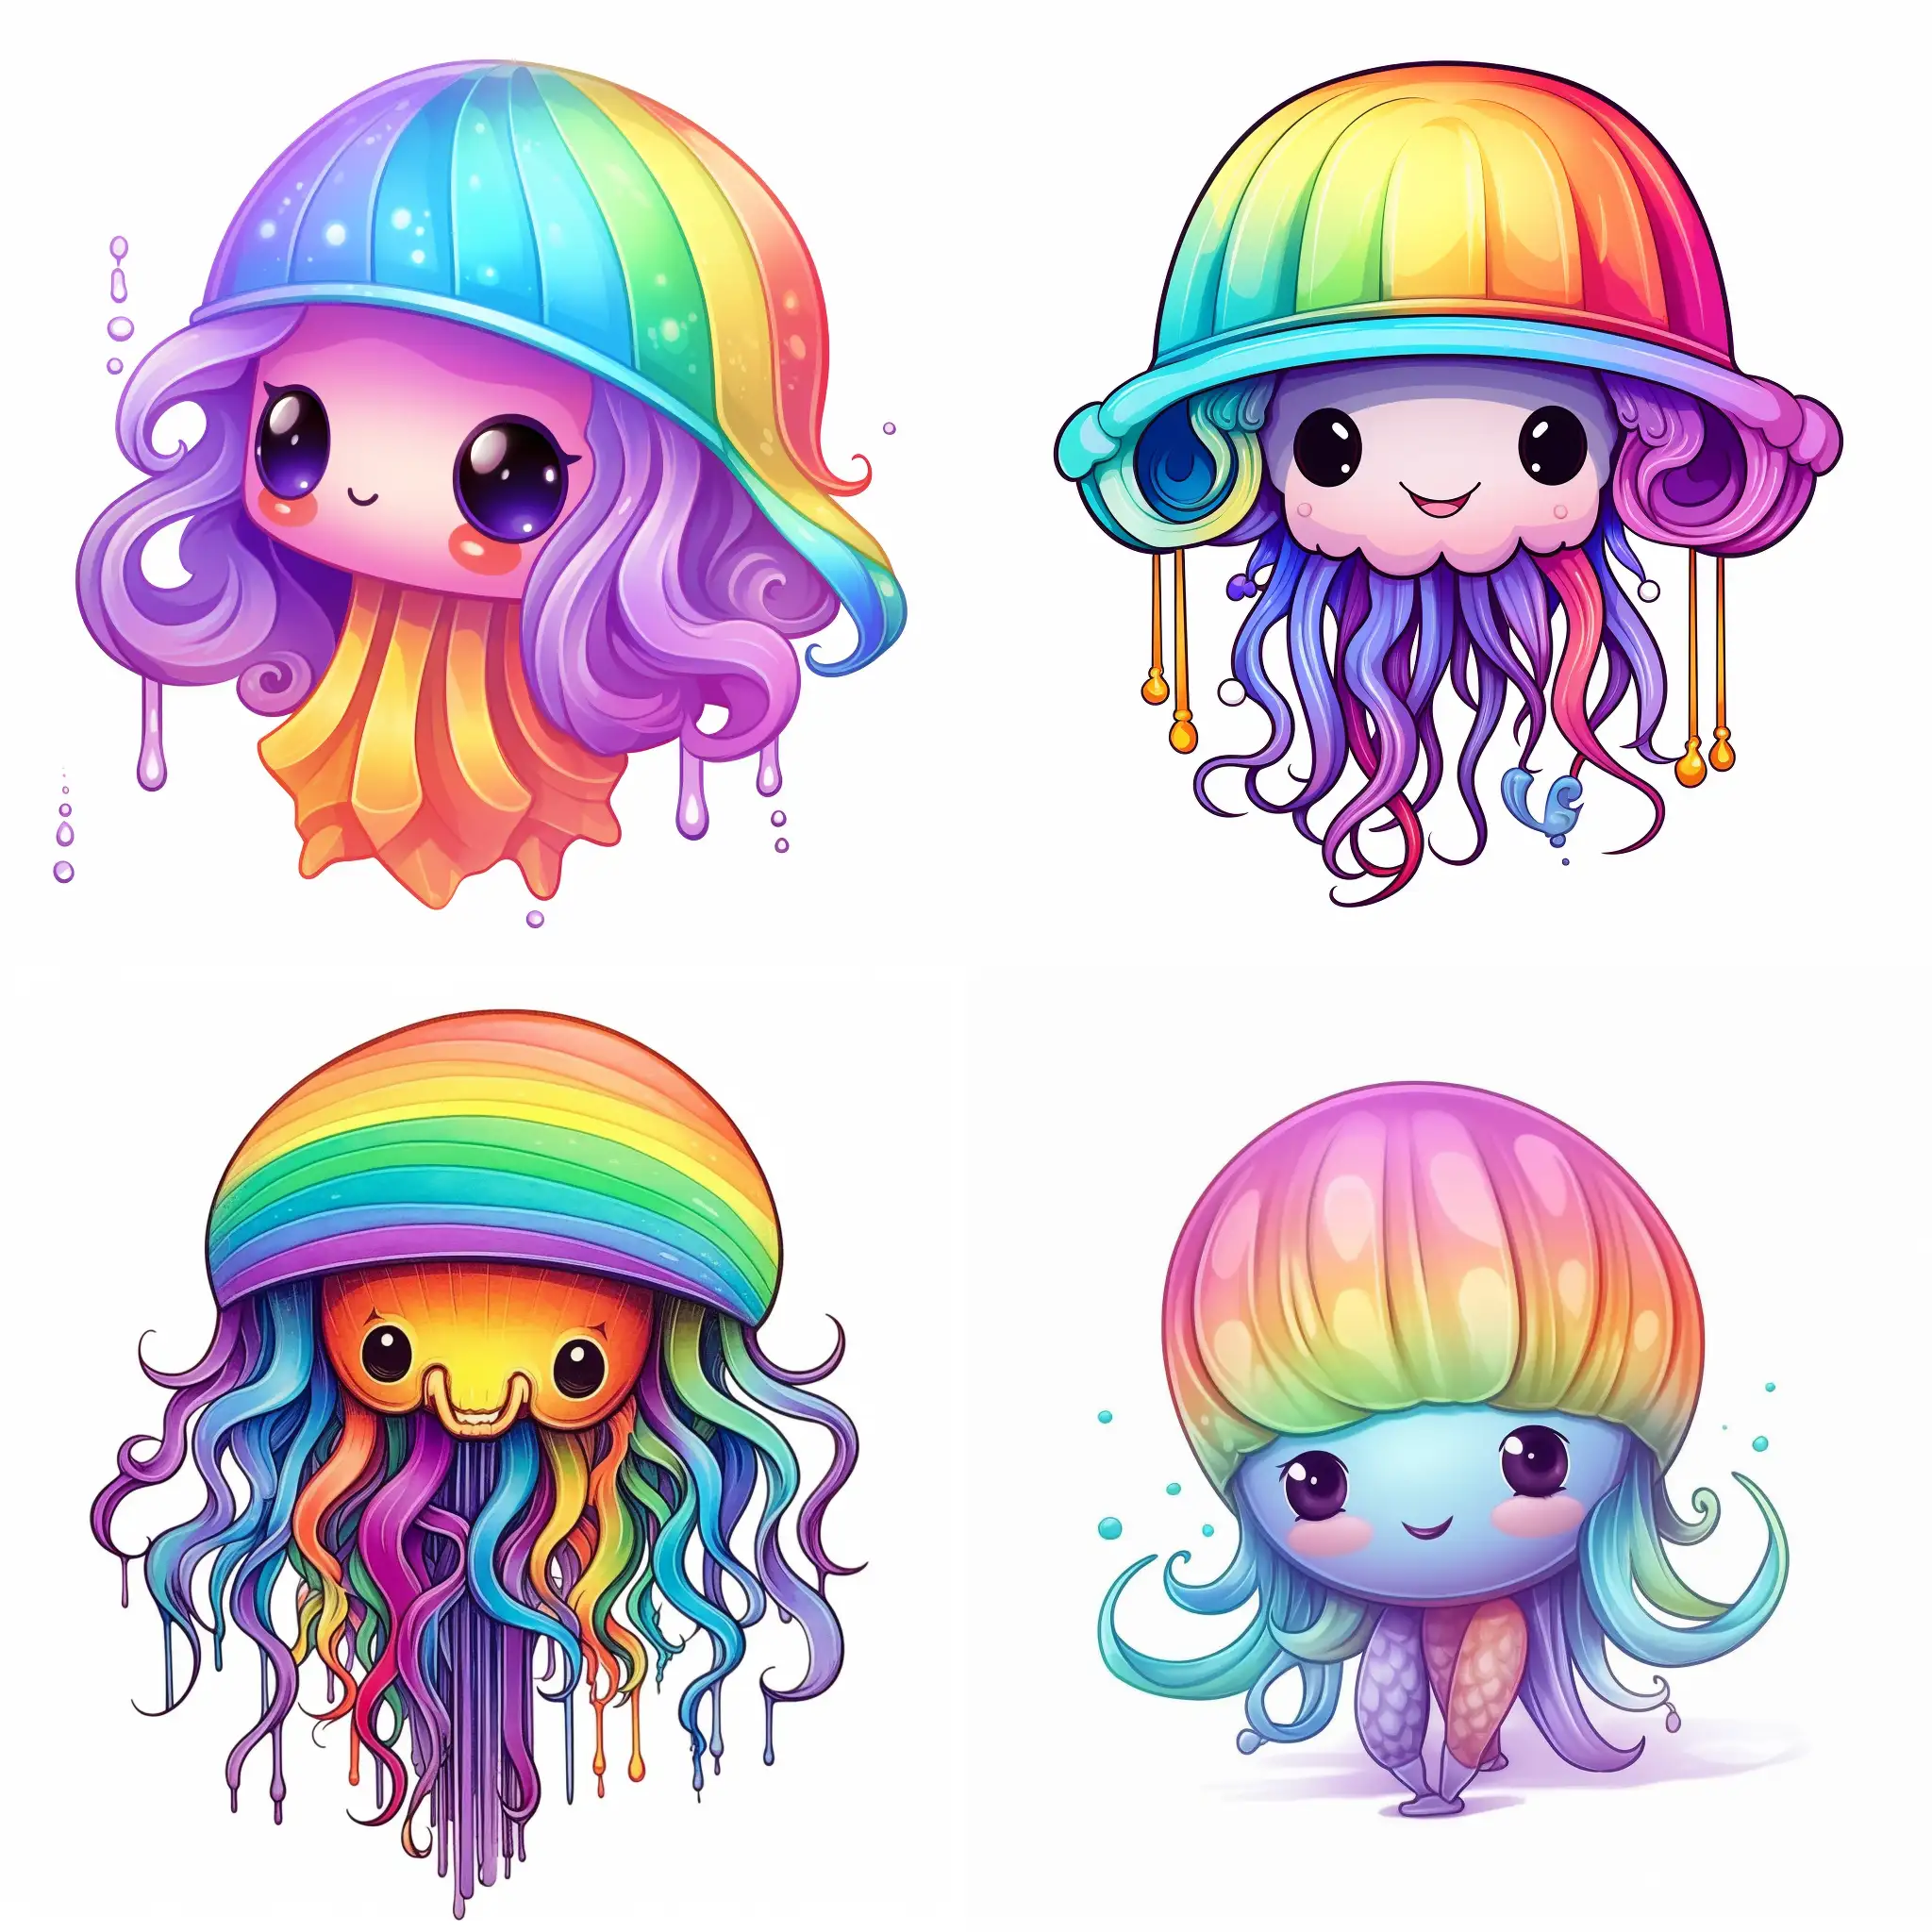 Adorable-Rainbow-Jellyfish-Octopus-with-Playful-Dreadlocks-in-Hat